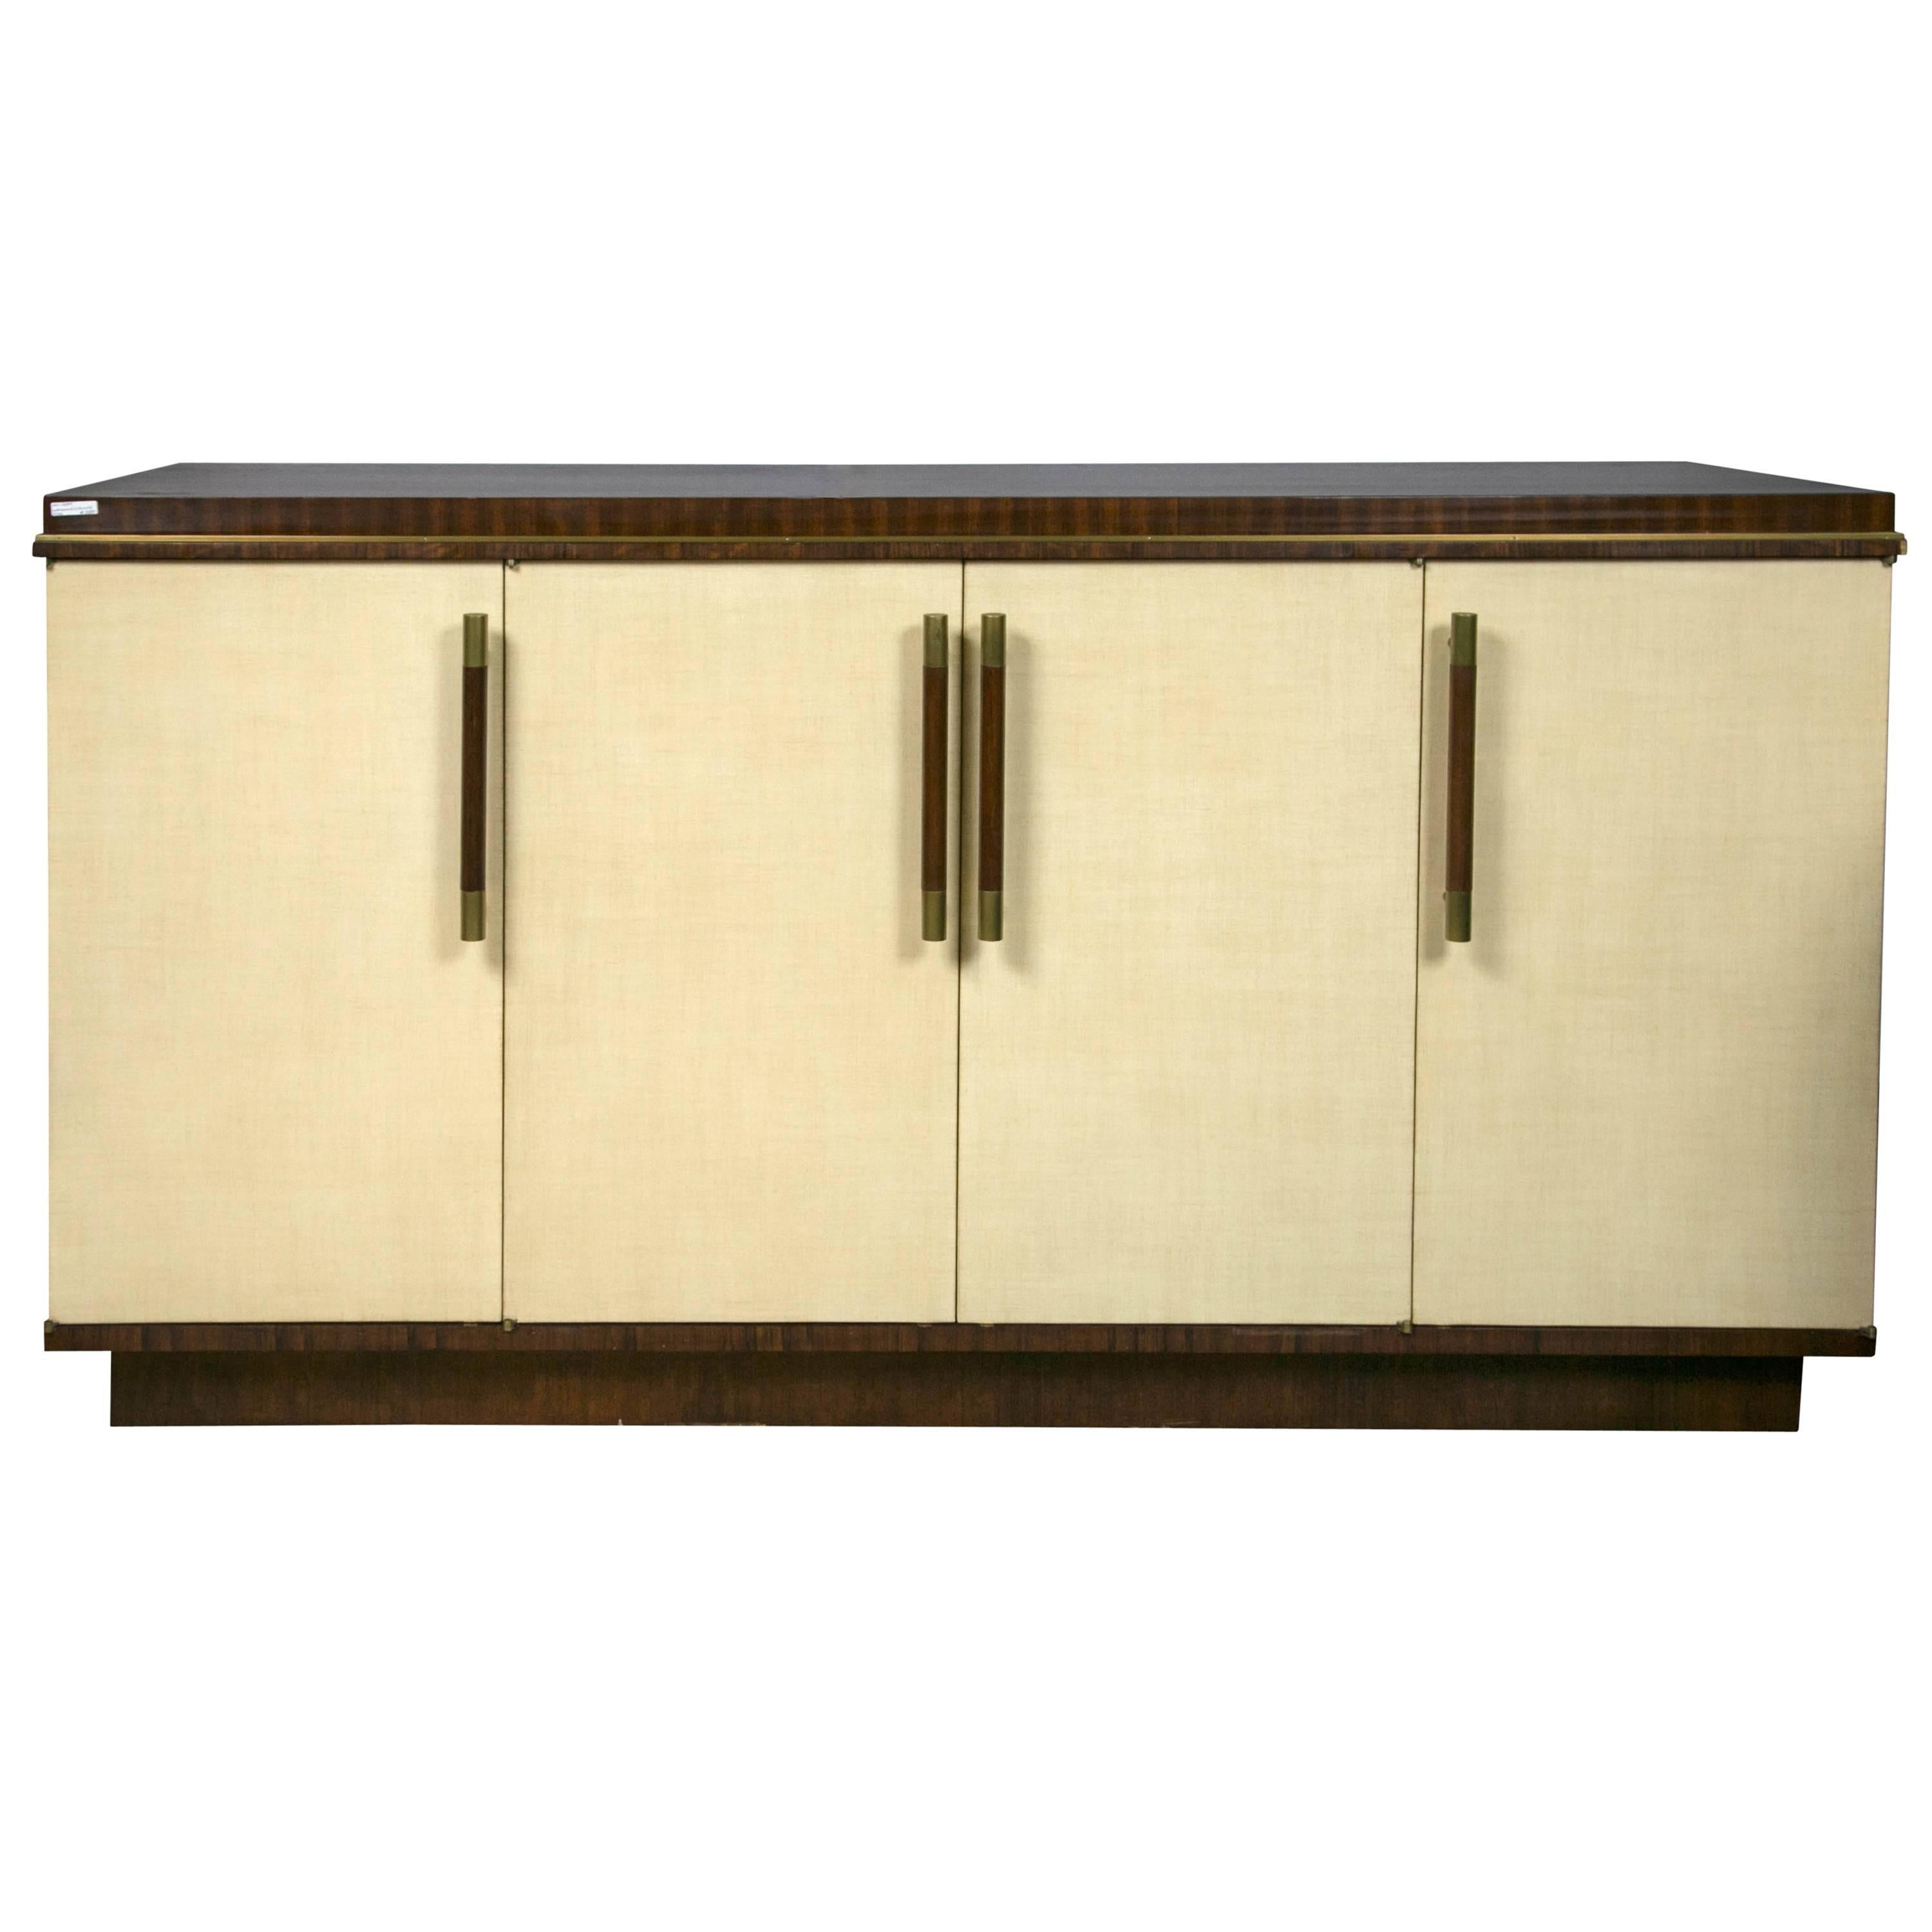 Jonathan Charles Buffet Sideboard Rosewood and Parchment